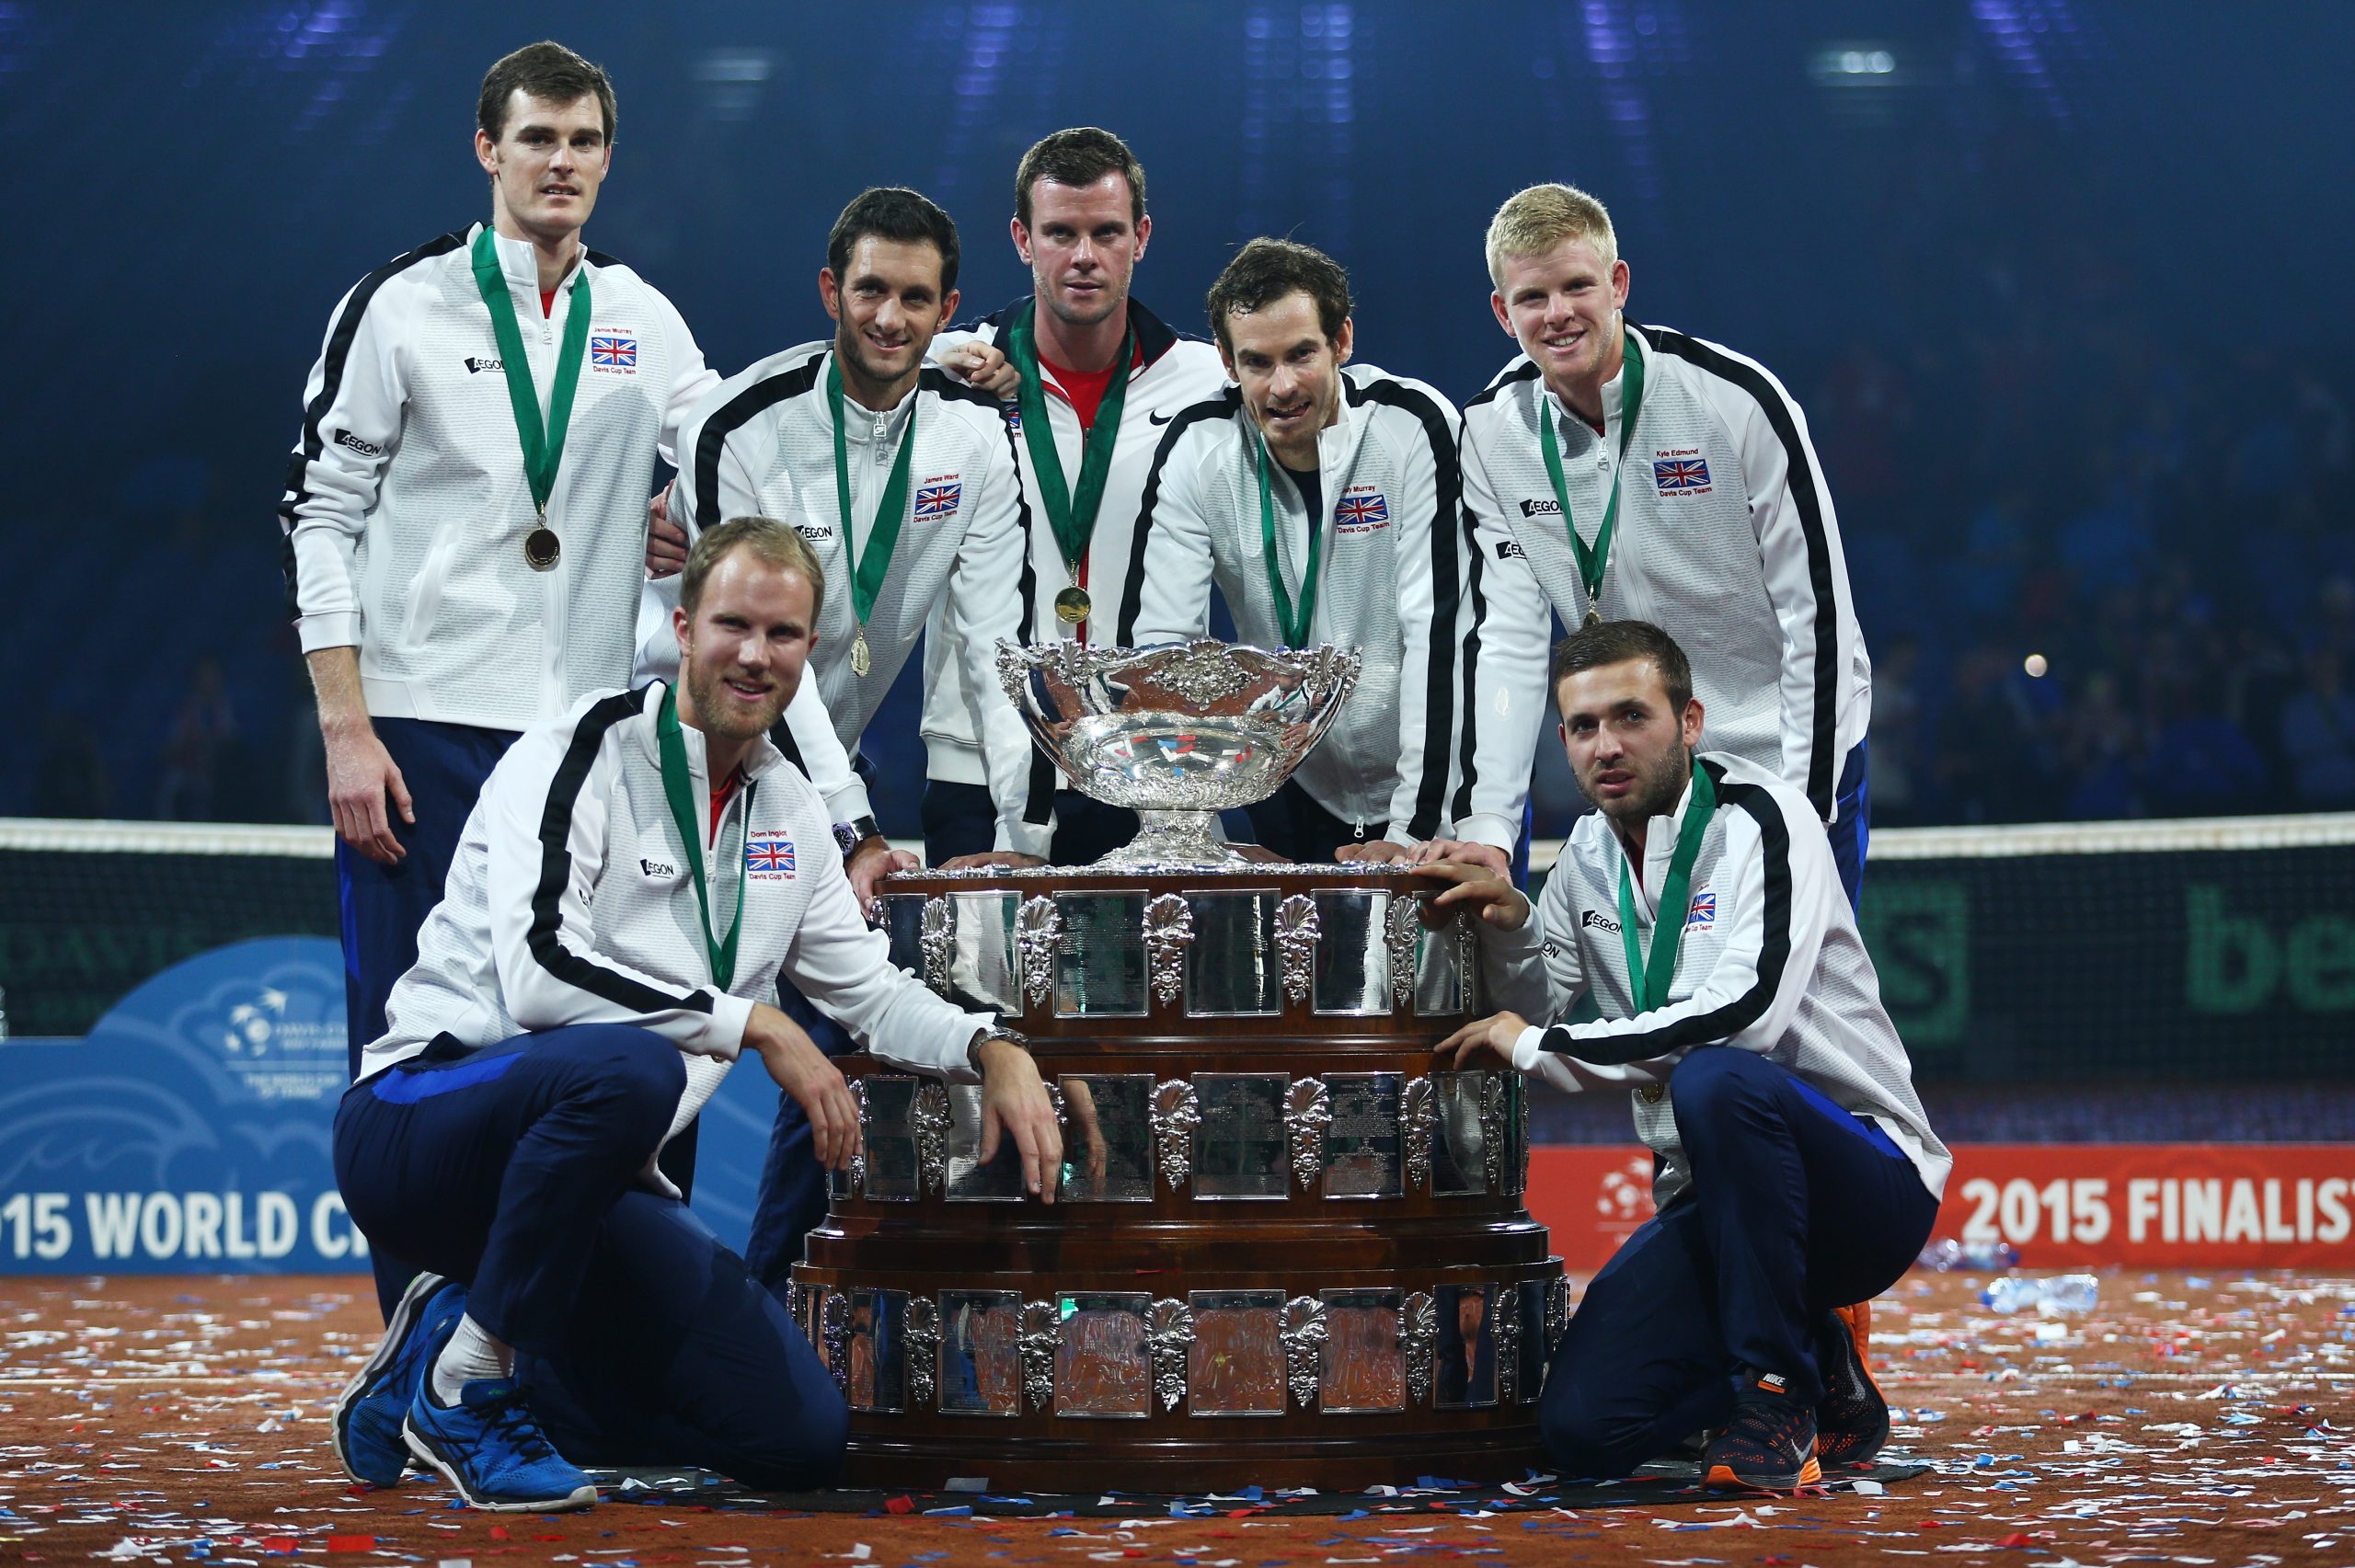 Dan Evans (bottom right) of Great Britain pose with his fellow teammates after winning the 2015 Davis Cup in Ghent, Belgium.